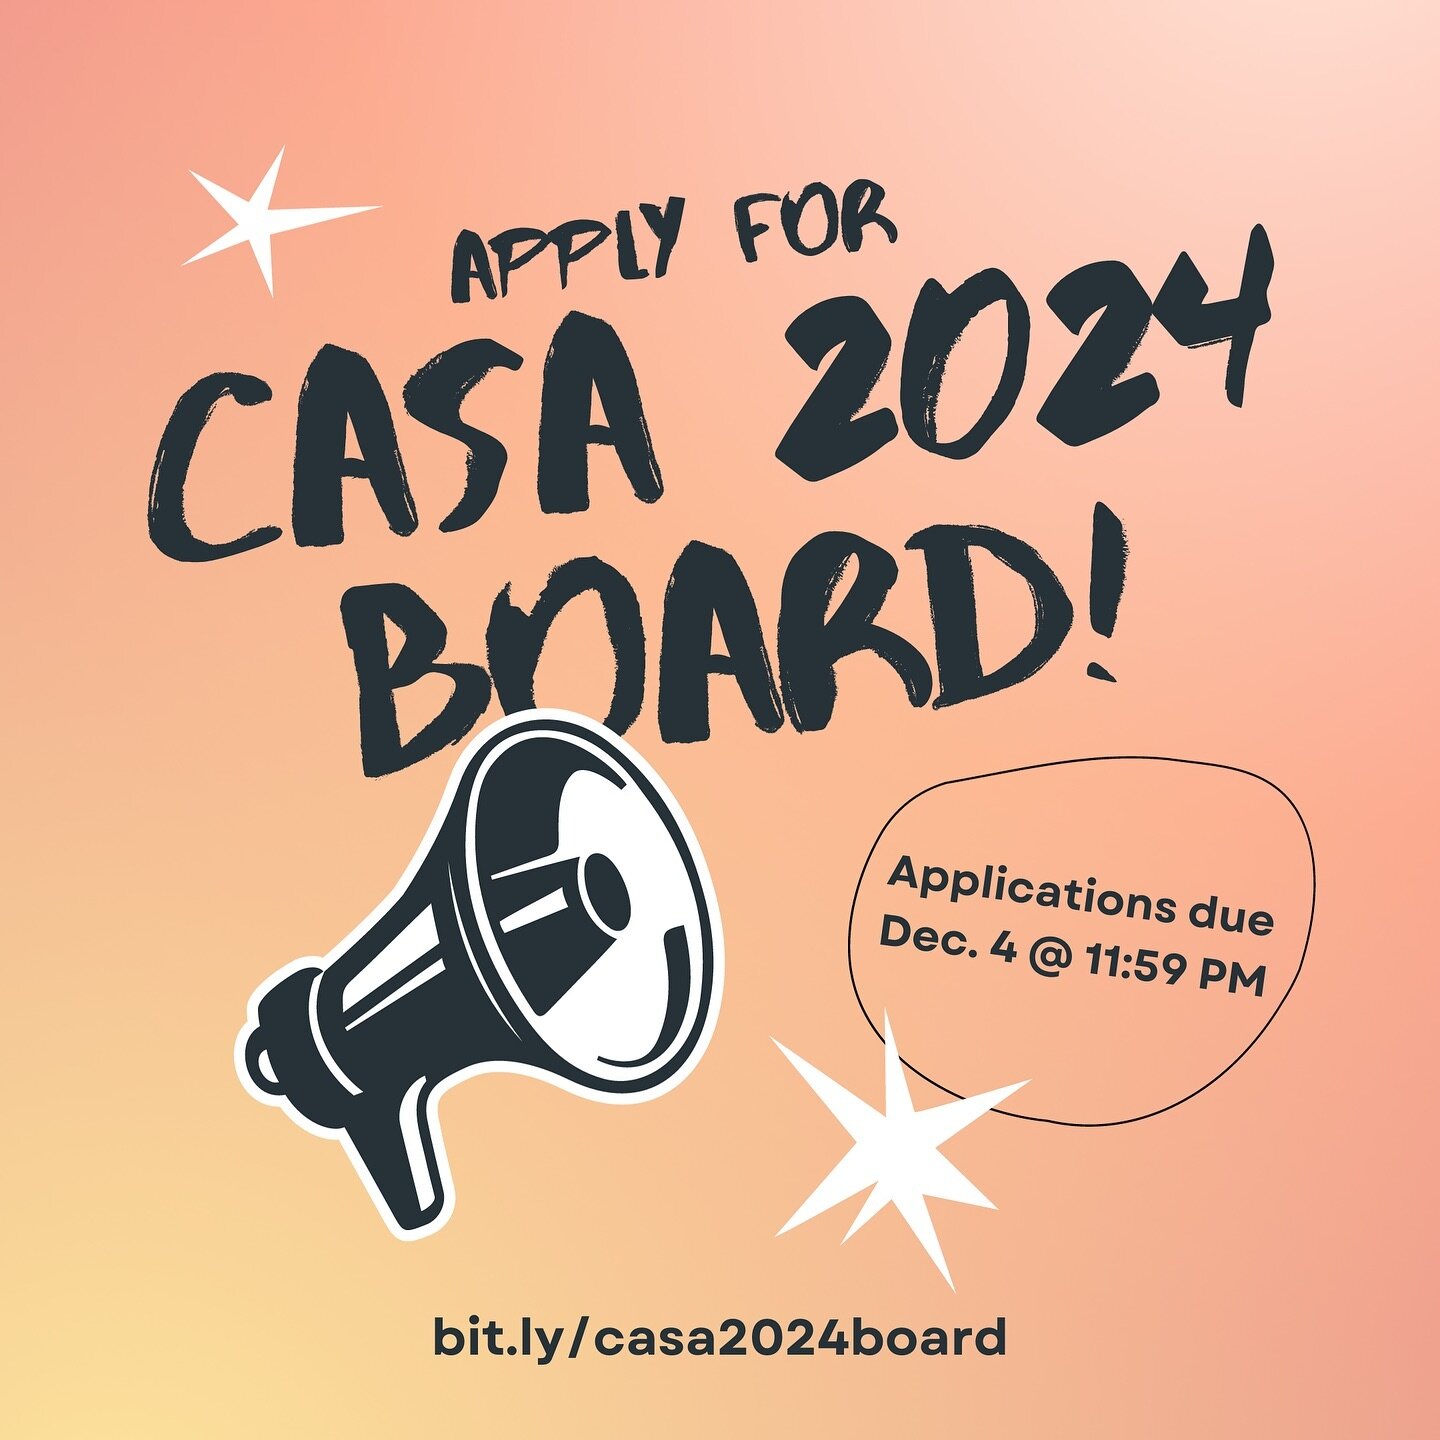 Applications for the 2024 CASA Board are now open! 📝⭐️ As a CASA Board Member, you will be supporting us in creating a space for Chinese/Chinese American expression, conversation, and celebration on campus.

Apply by Monday, Dec. 14 @ 11:59 PM! 🗓️
